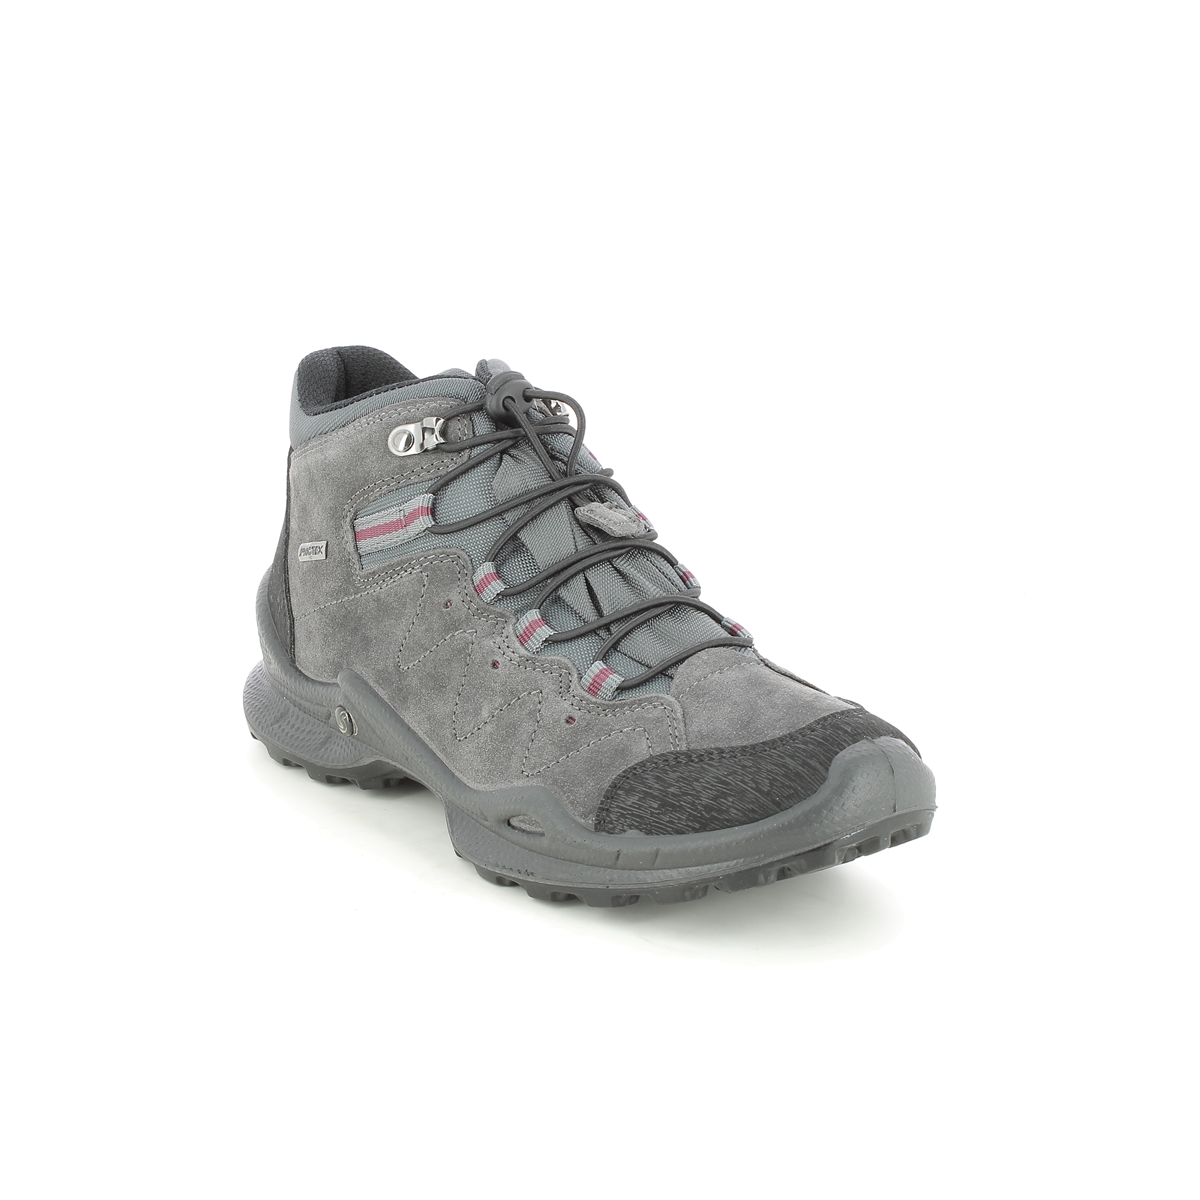 Imac Foxy   Boot Tex Grey Suede Womens Walking Boots 8819-7104018 In Size 41 In Plain Grey Suede